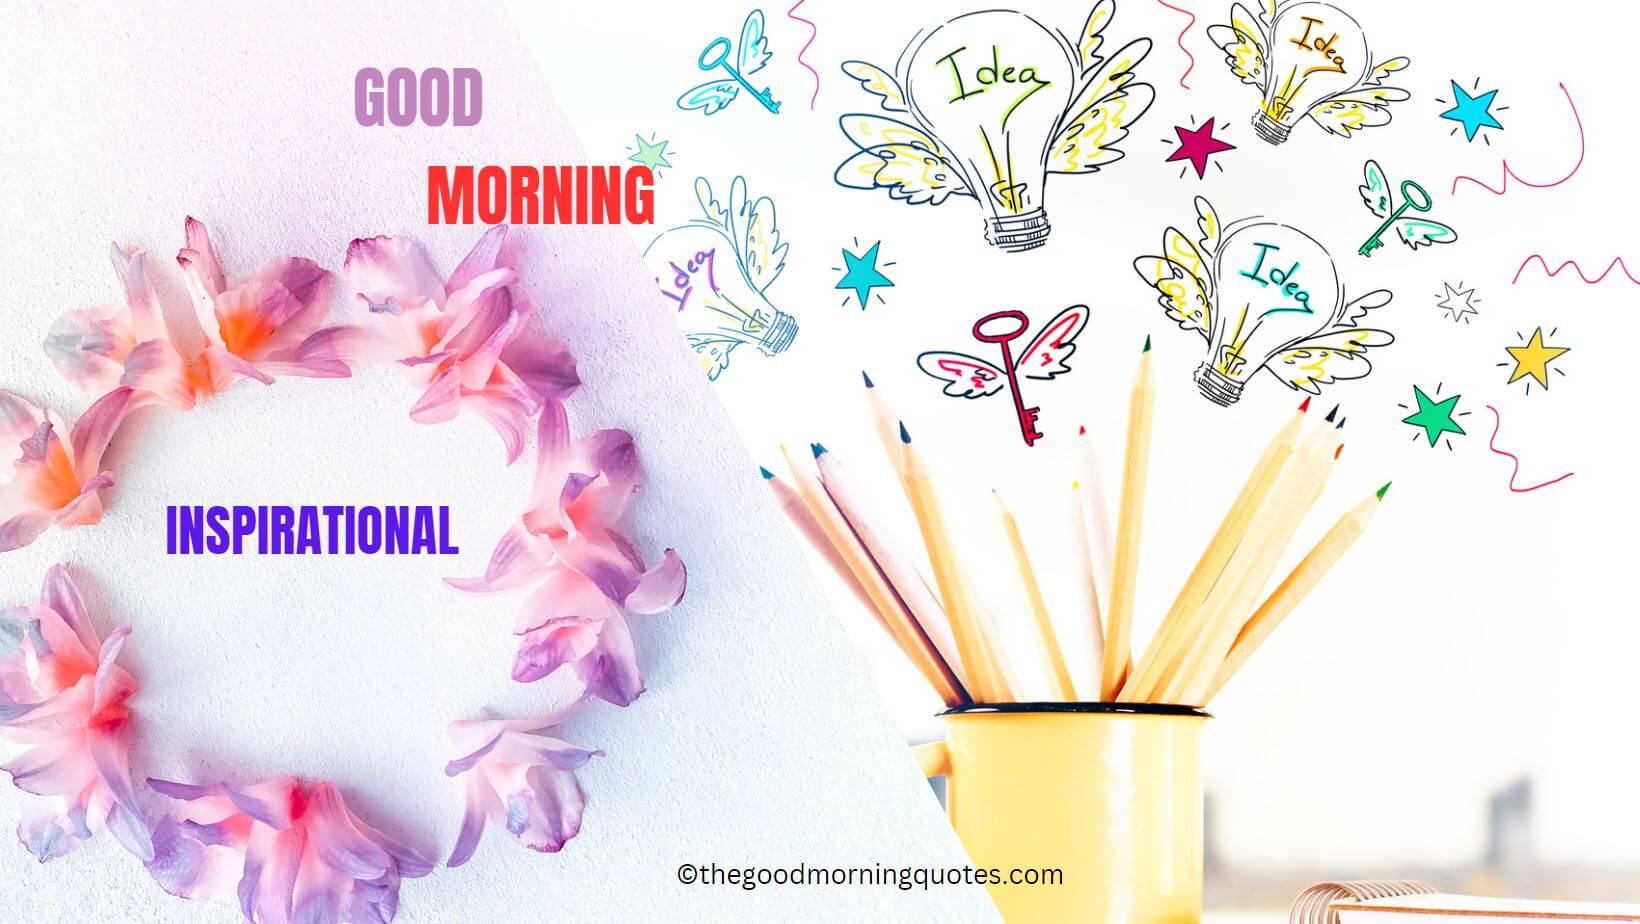 New Good Morning Inspirational Quotes in Hindi